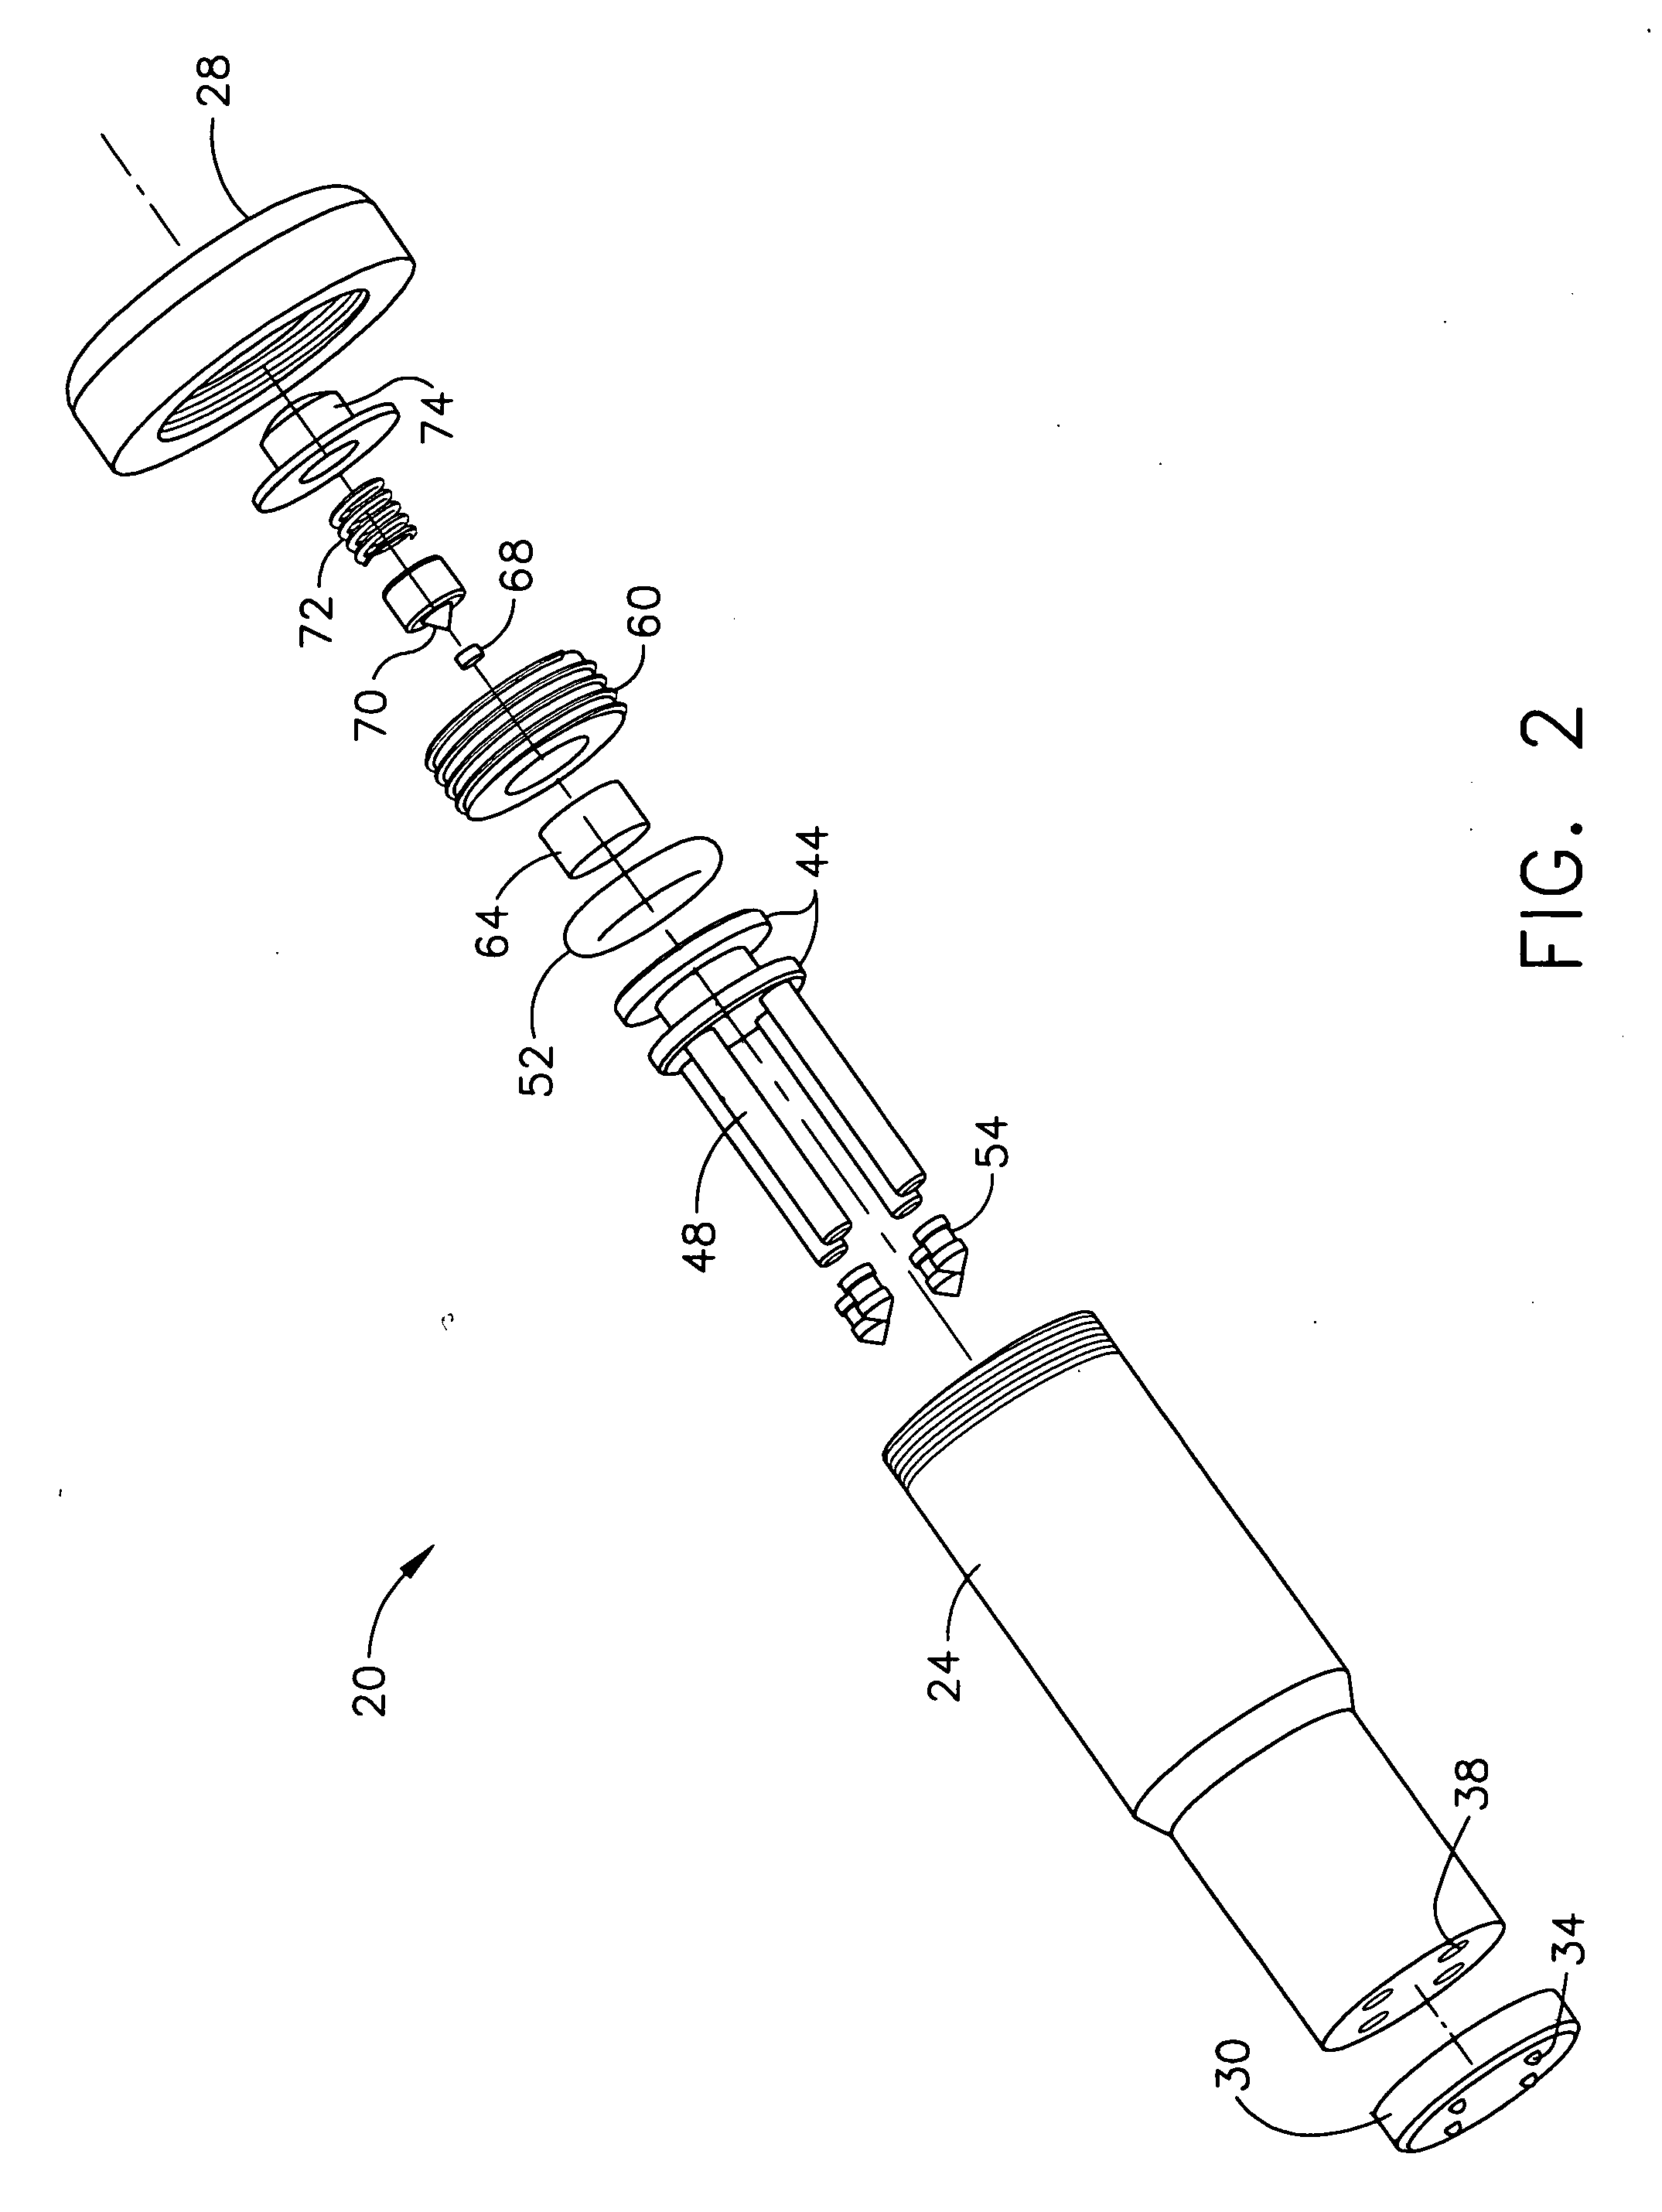 Drug delivery device for buccal and aural applications and other areas of the body difficult to access